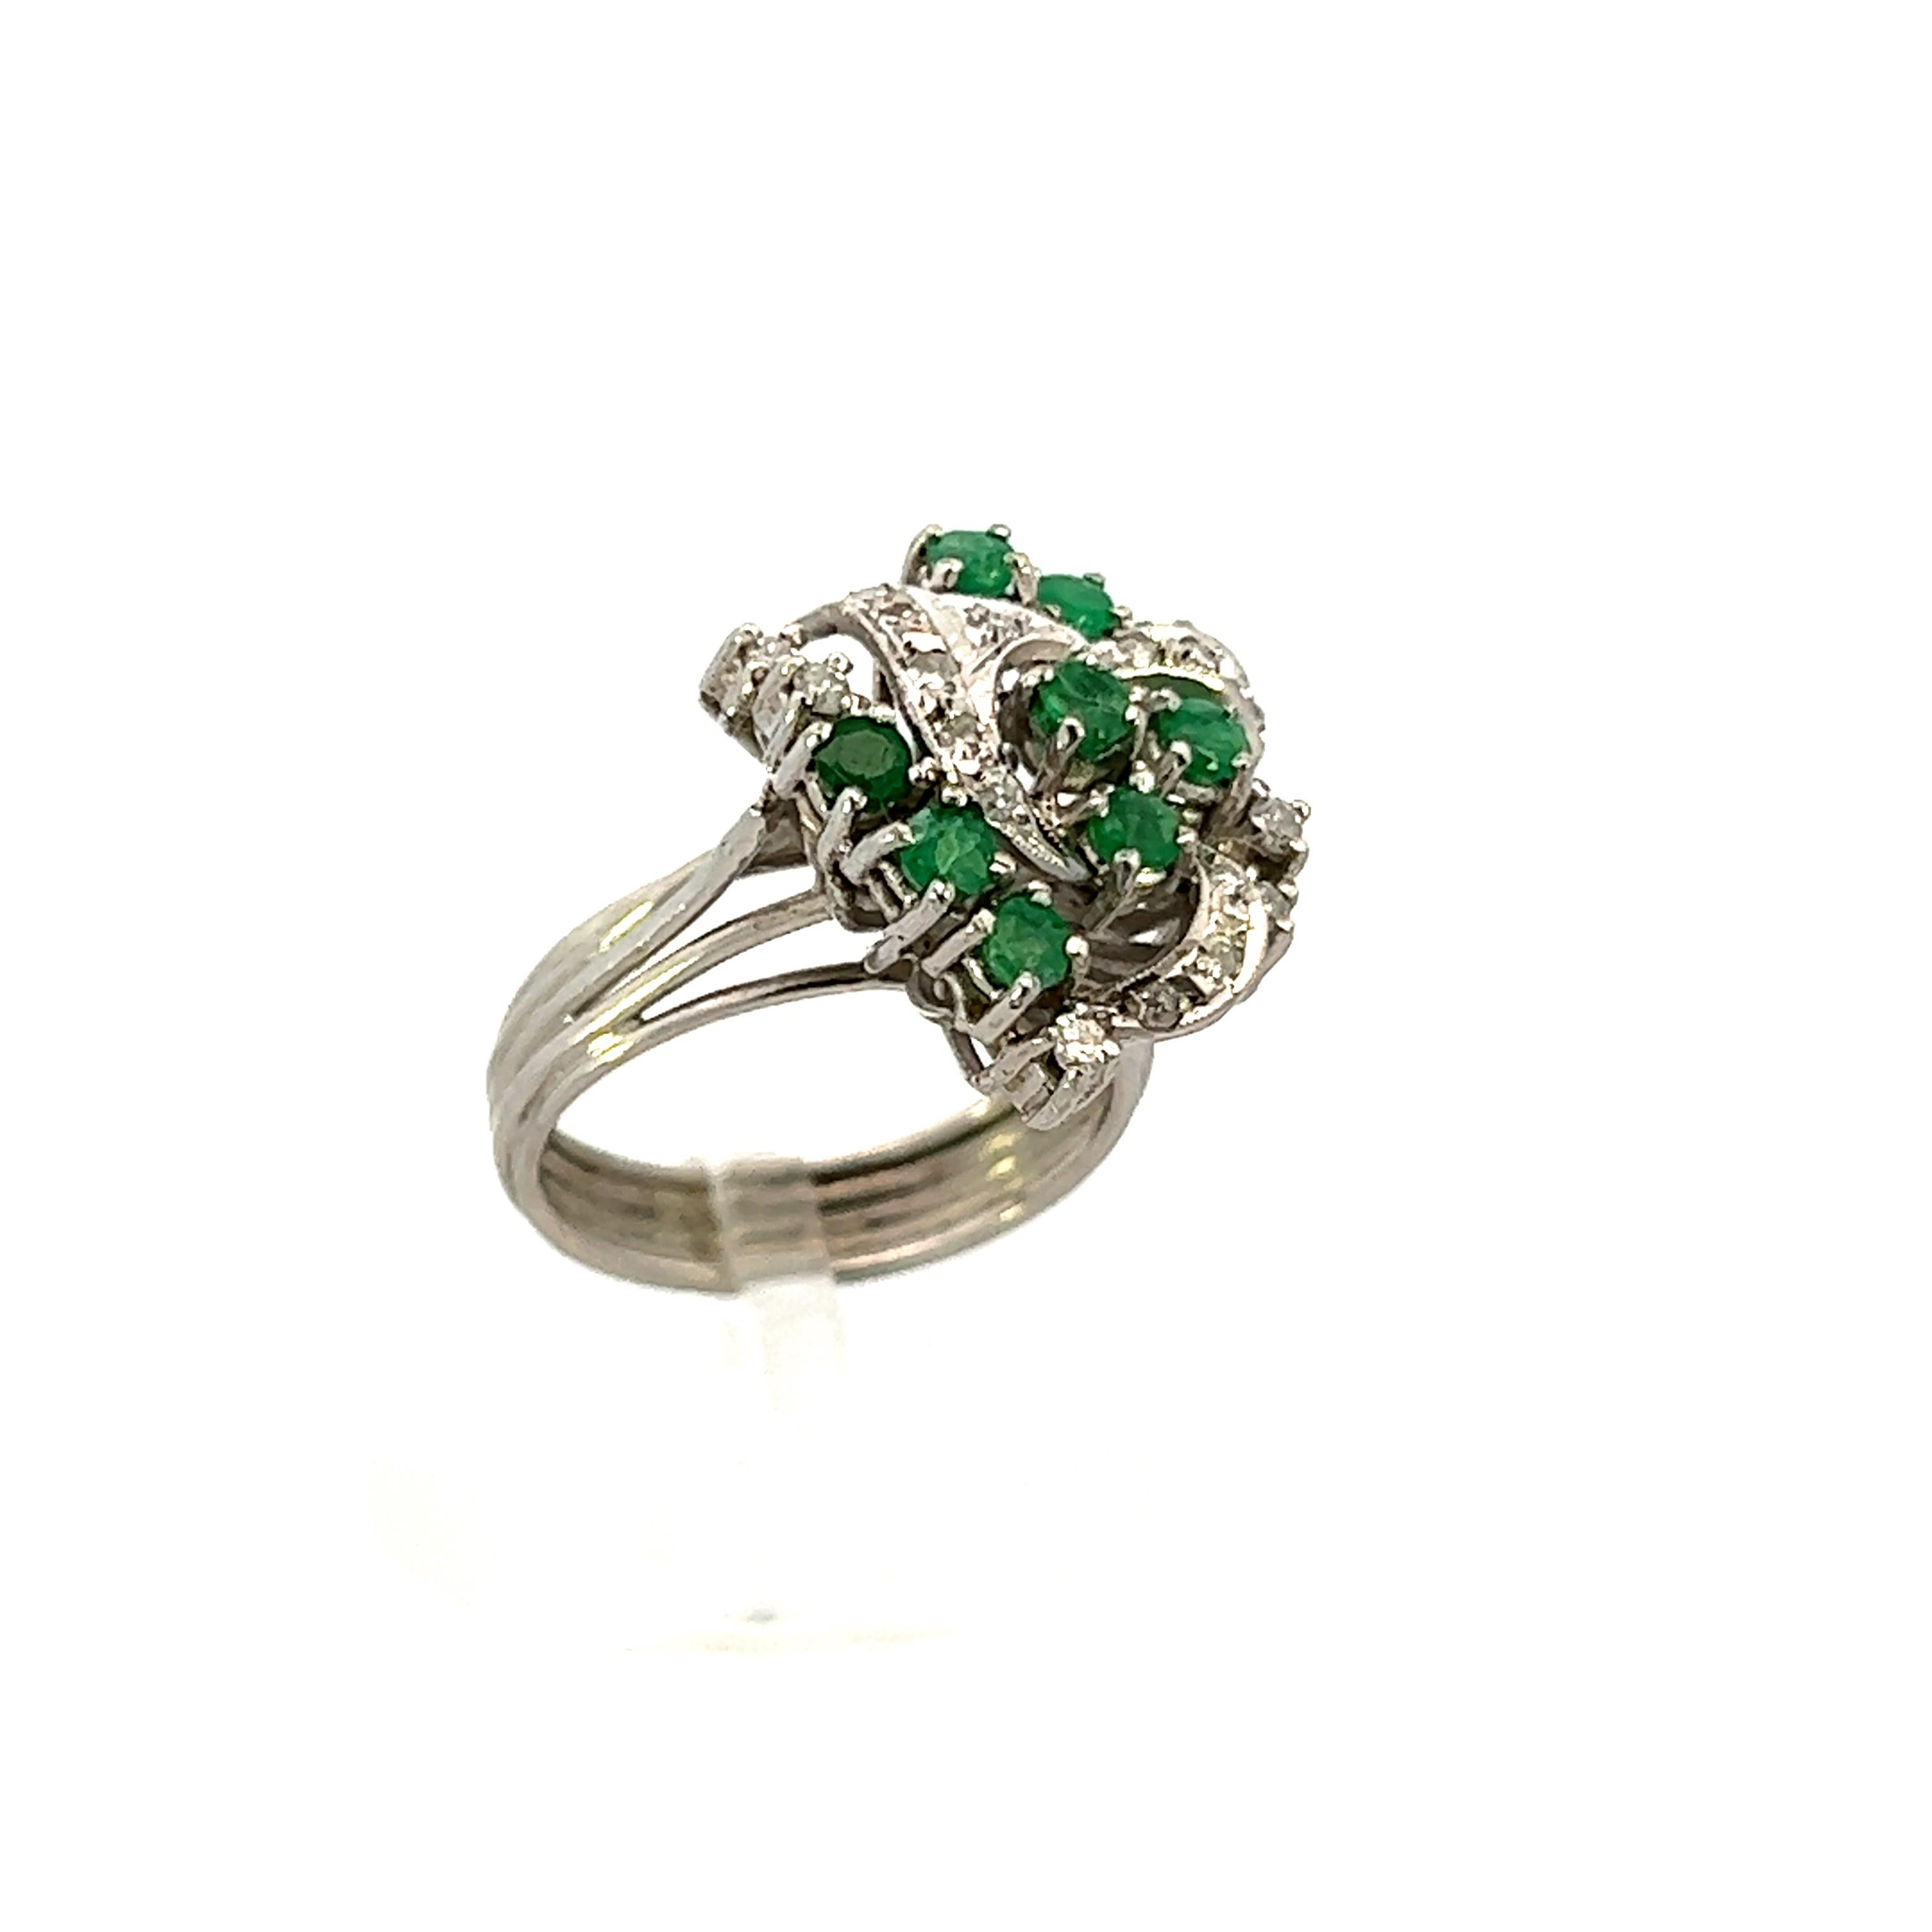 This 1950s platinum cocktail ring features emeralds with diamonds and is absolutely beautiful. The ring contains .25 cttw of G color VS1 clarity diamonds and .45 cttw of emerald, interconnected with platinum. Platinum, a forever white metal, is more